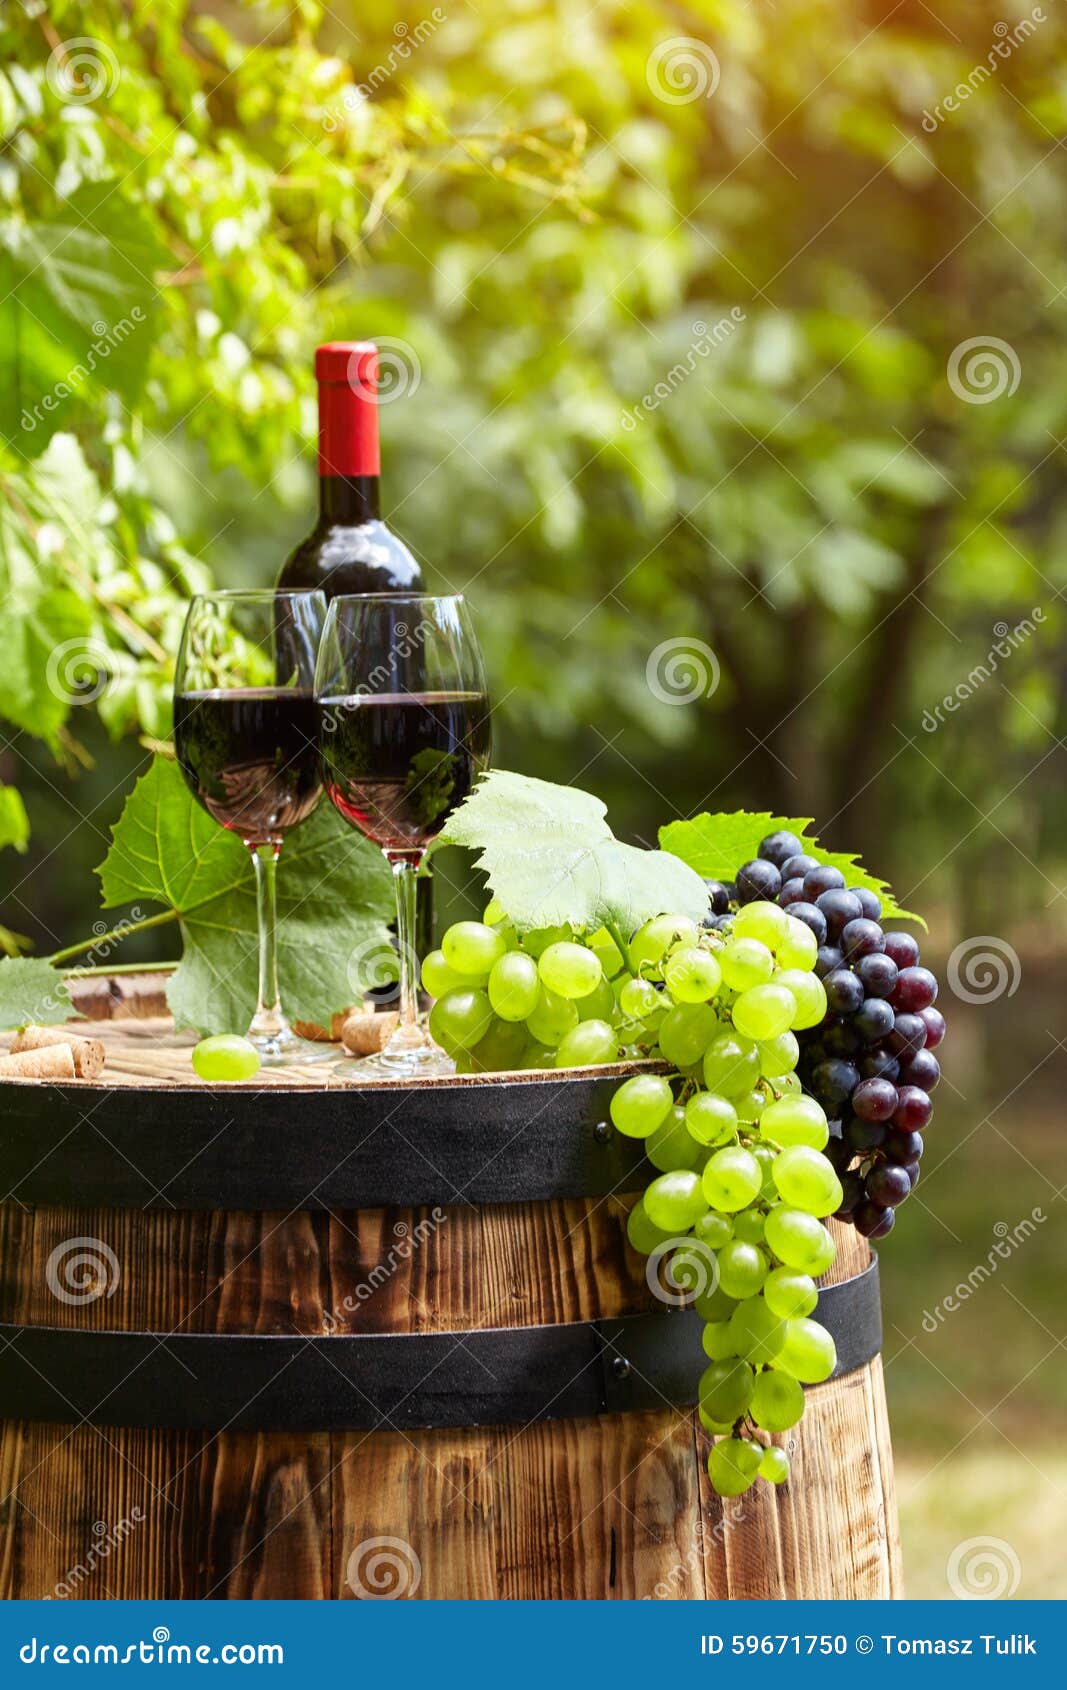 Red wine on garden terrace stock photo. Image of color - 59671750